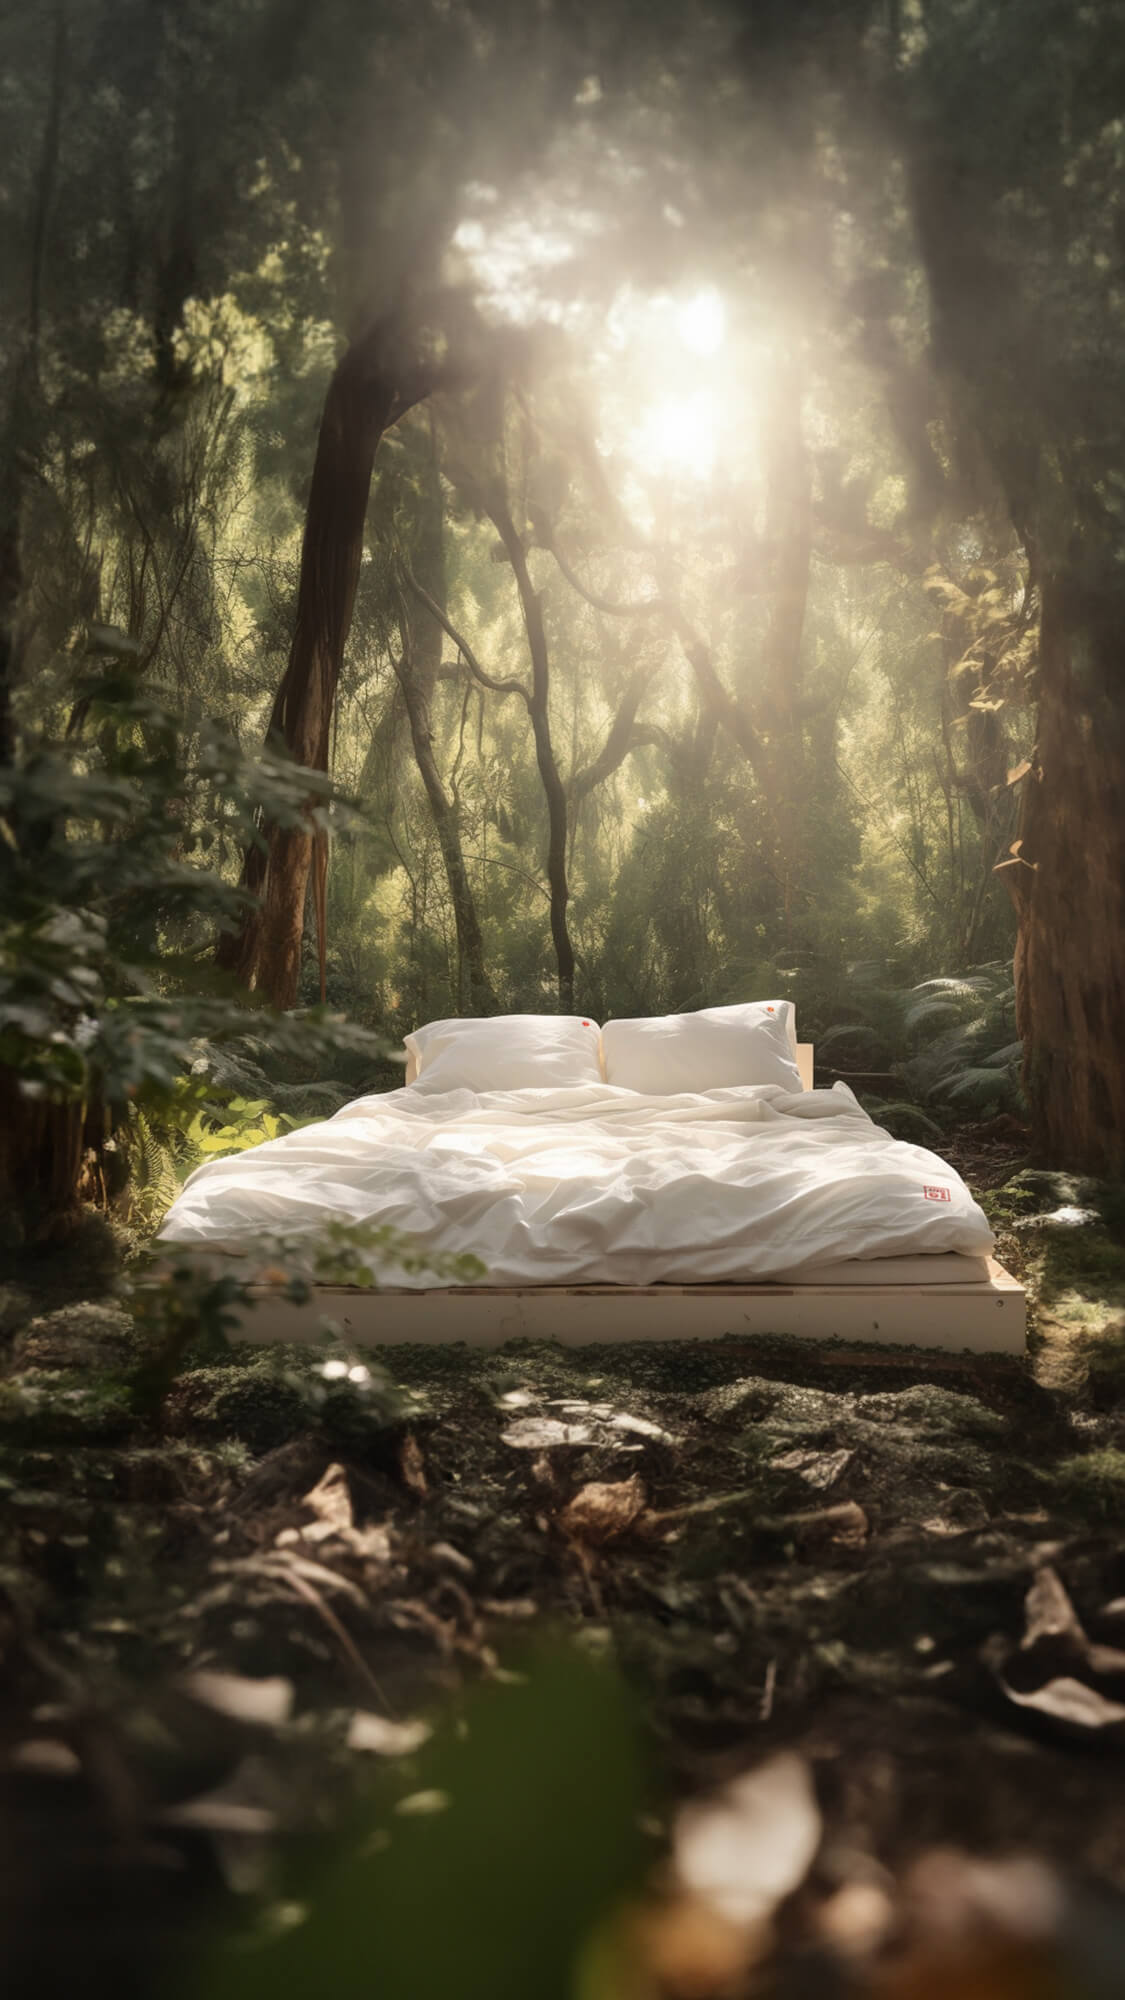 A cozy looking Bed with white Aizome bedding is standing on a Clearance in the Forest 